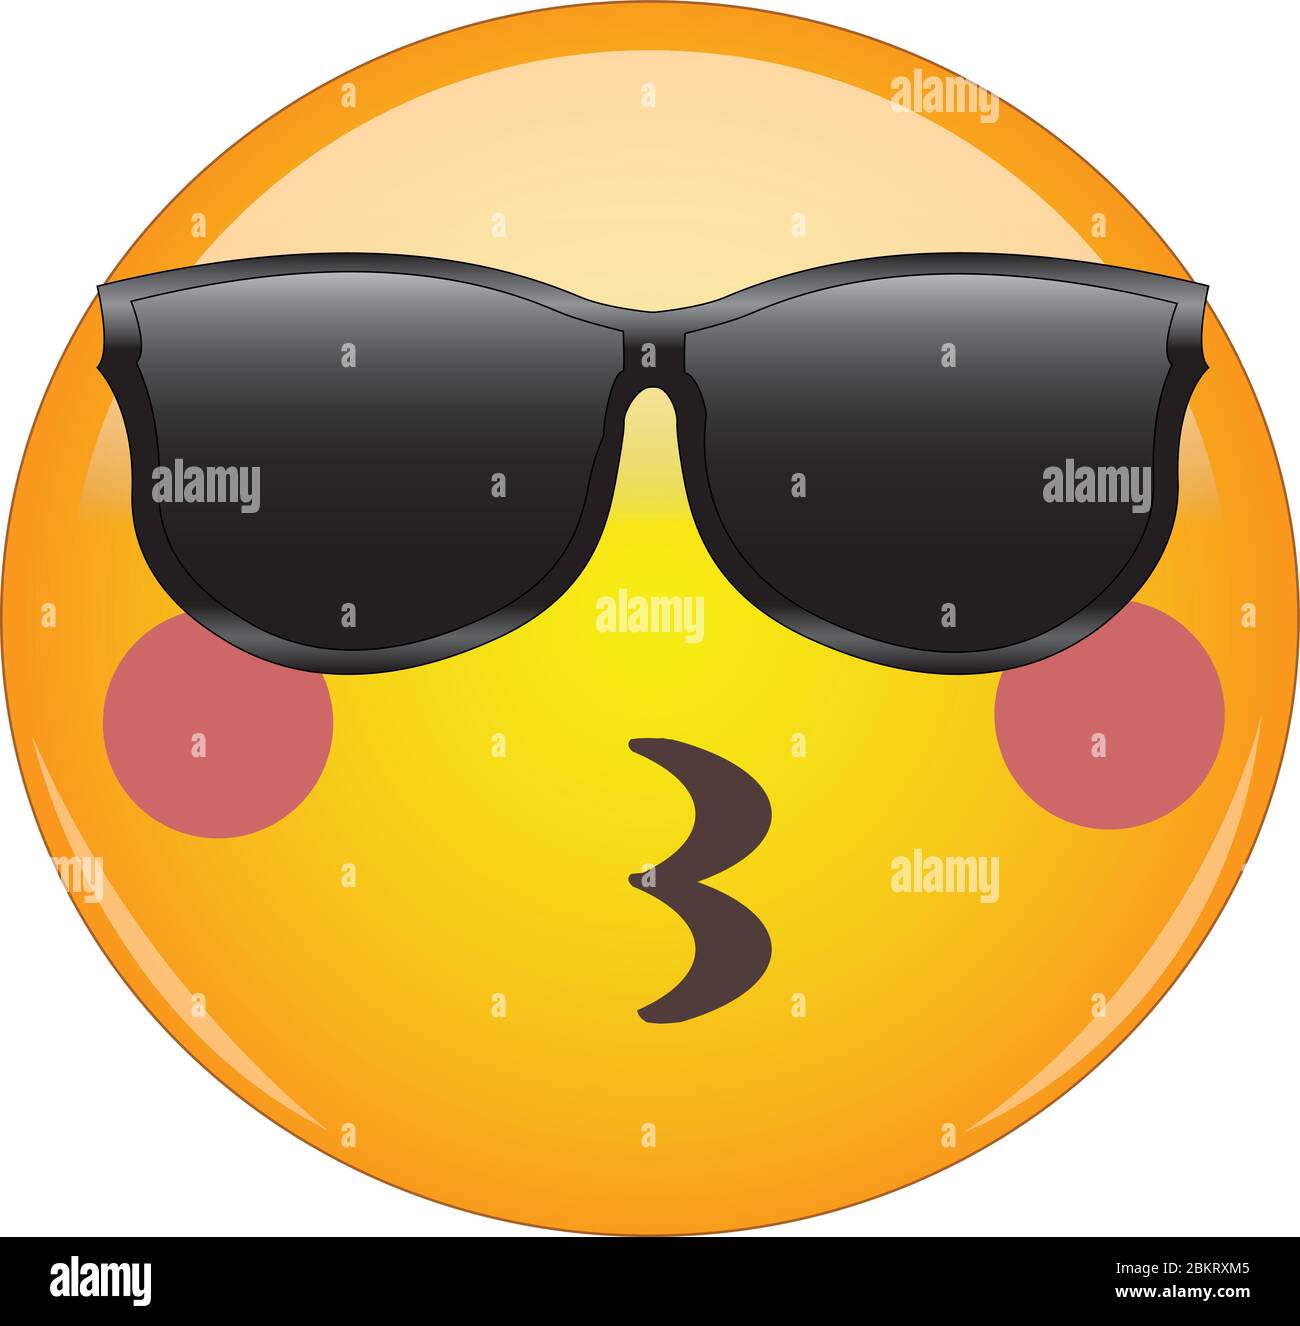 Cool kissing emoji in sunglasses! Awesome blushing yellow face emoticon wearing sunglasses, blushing and kissing lips. Expression of love, affection, Stock Vector